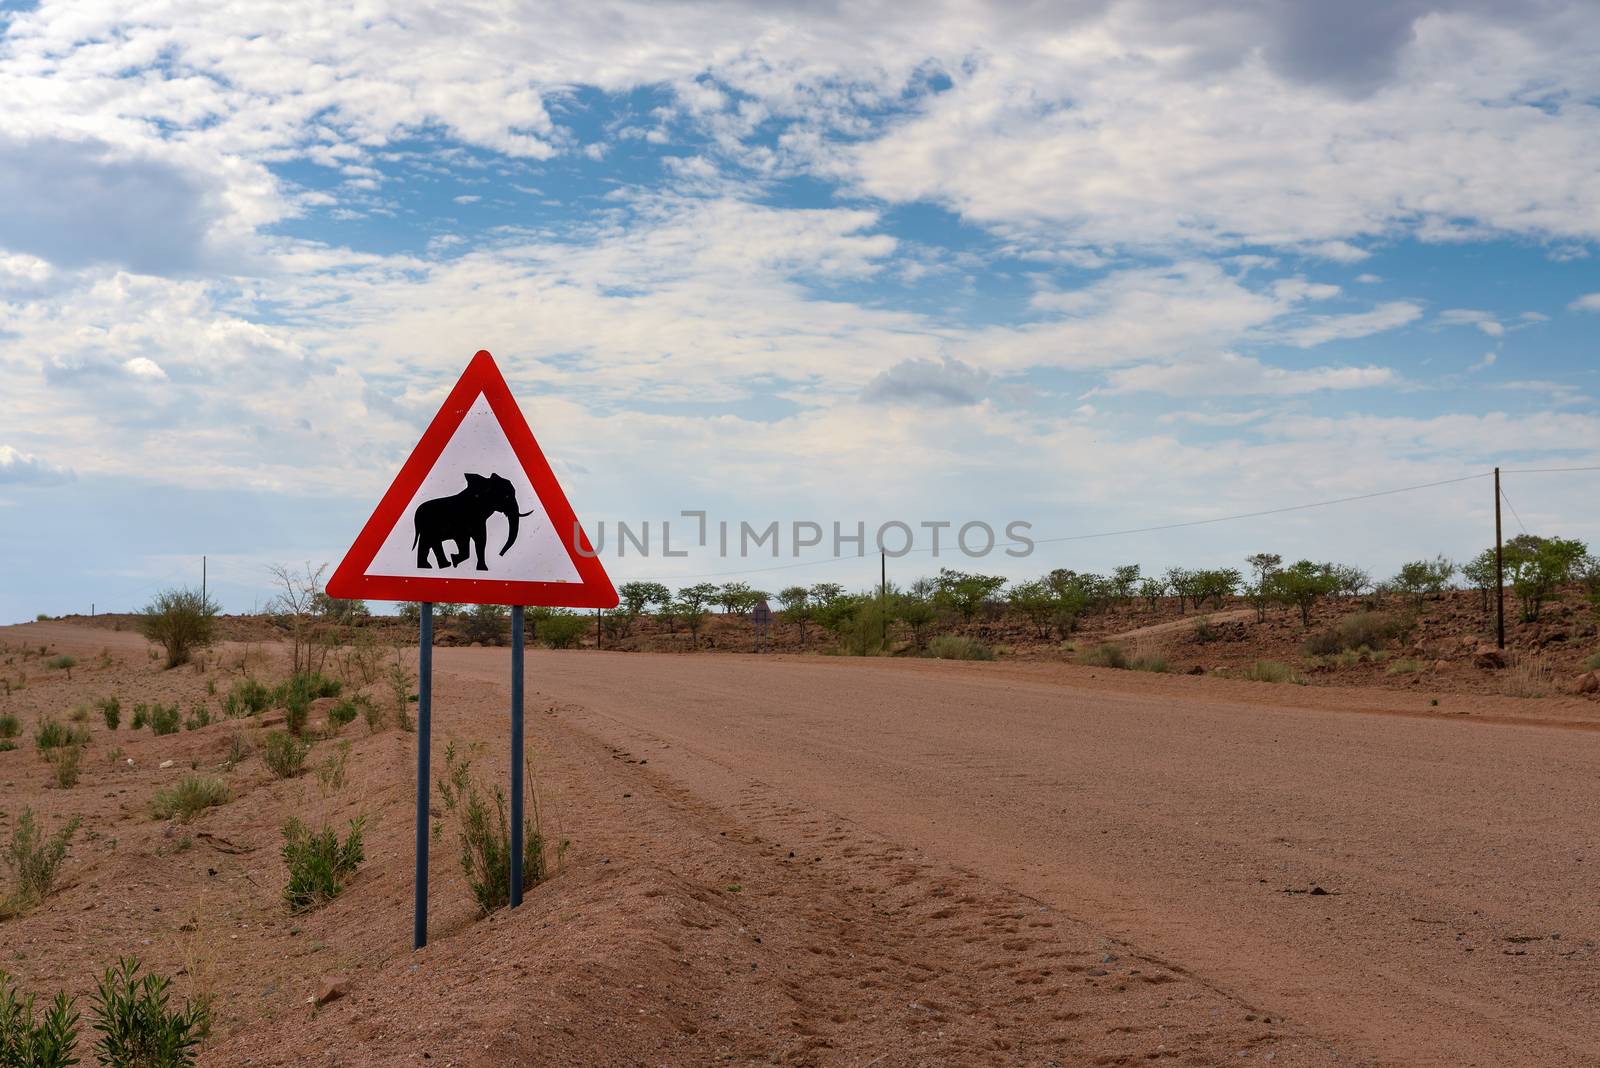 Elephant crossing warning road sign placed by a gravel road in the desert of Namibia.